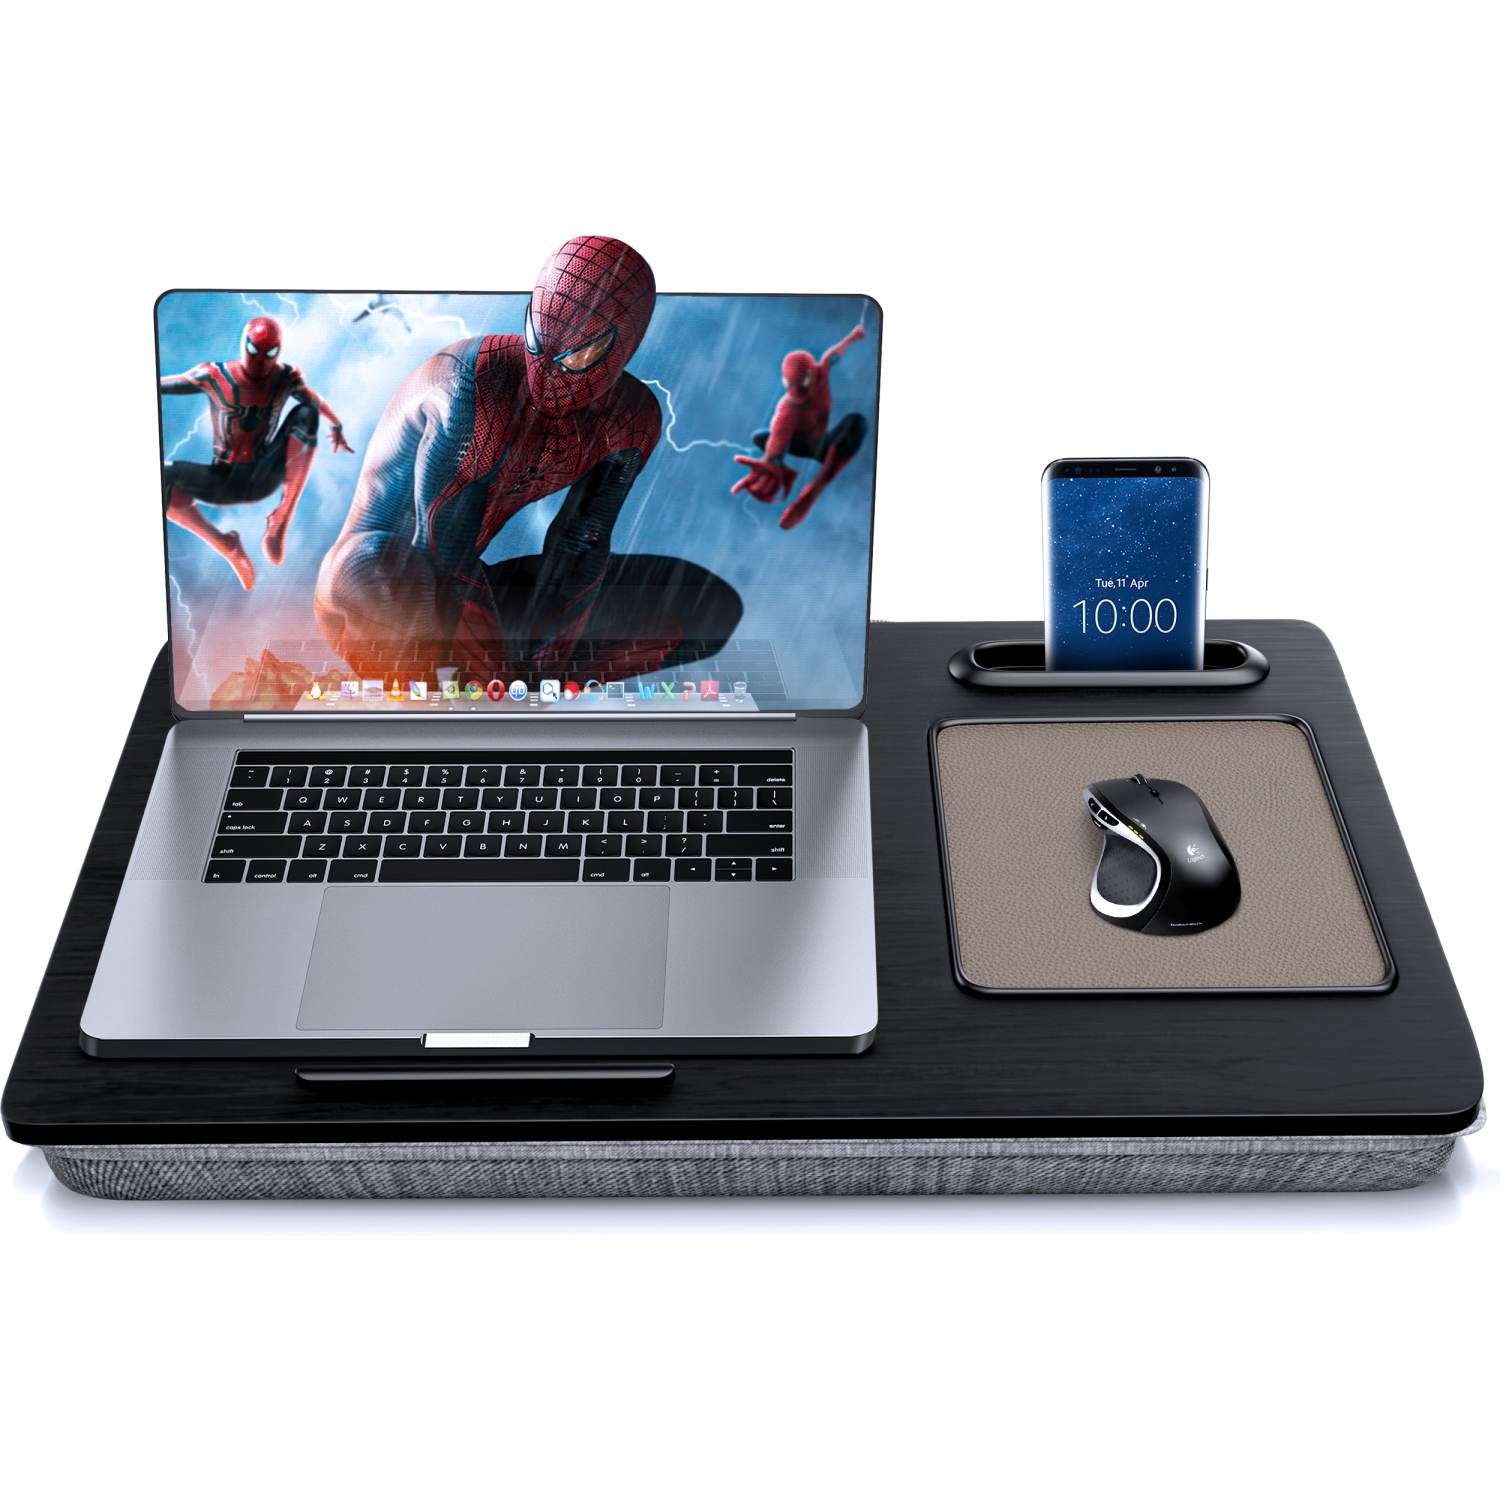 SHOPPINGALL Lap Desk - for 17 inch Laptops or Smaller - Integrated Mouse Pad, Tablet & Smartphone Holder - SA-BR182 (Black)